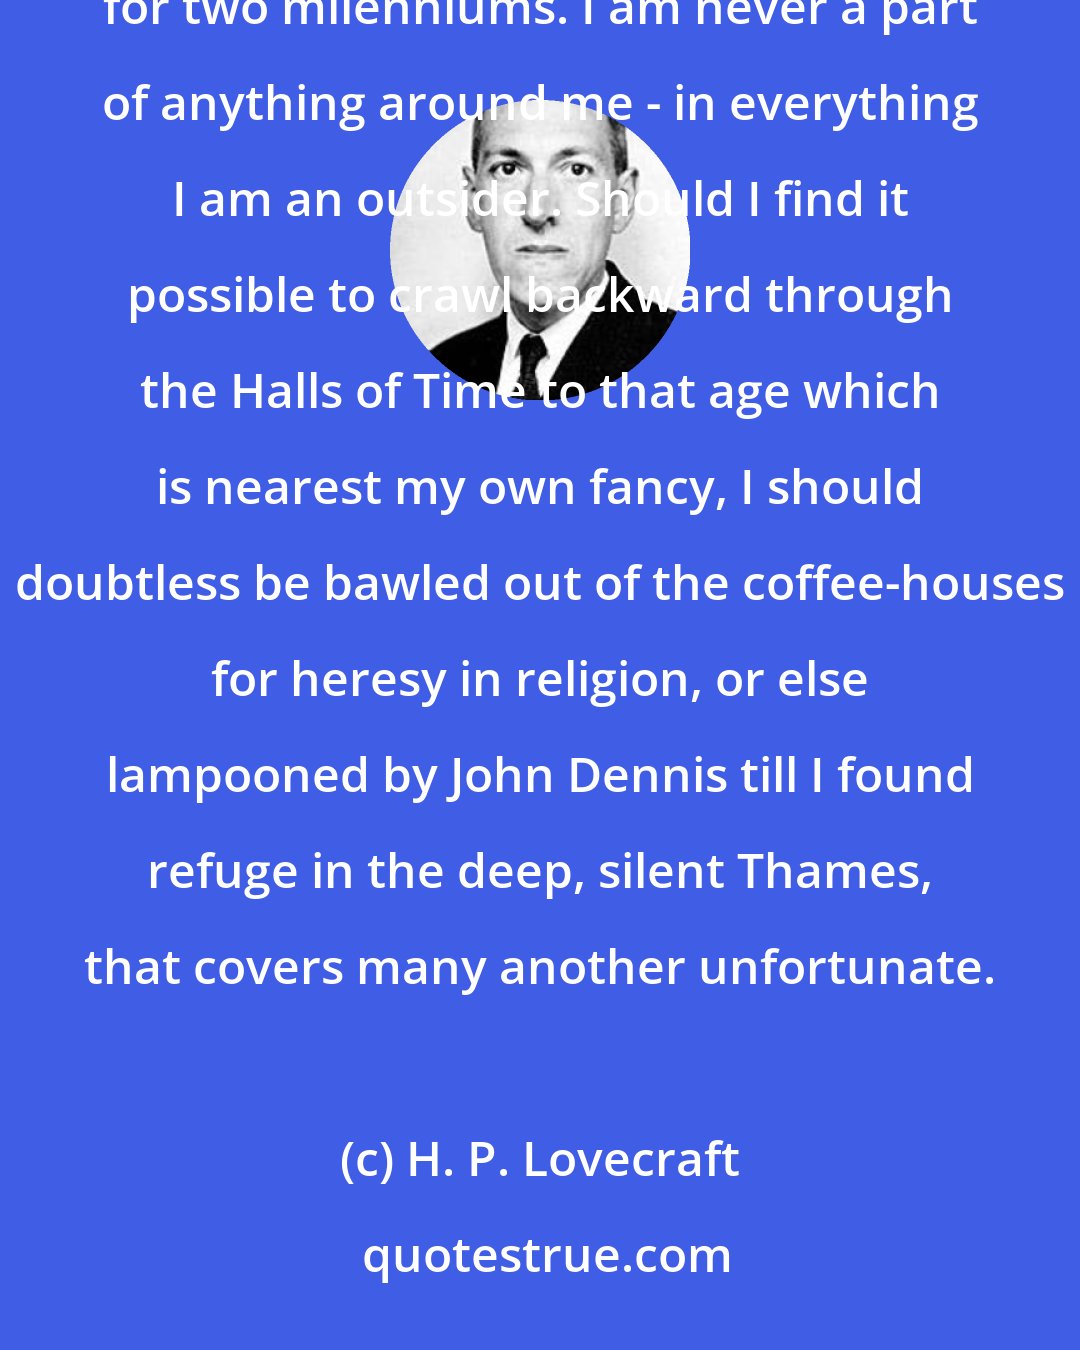 H. P. Lovecraft: Everything I loved had been dead for two centuries - or, as in the case of Graeco-Roman classicism, for two milenniums. I am never a part of anything around me - in everything I am an outsider. Should I find it possible to crawl backward through the Halls of Time to that age which is nearest my own fancy, I should doubtless be bawled out of the coffee-houses for heresy in religion, or else lampooned by John Dennis till I found refuge in the deep, silent Thames, that covers many another unfortunate.